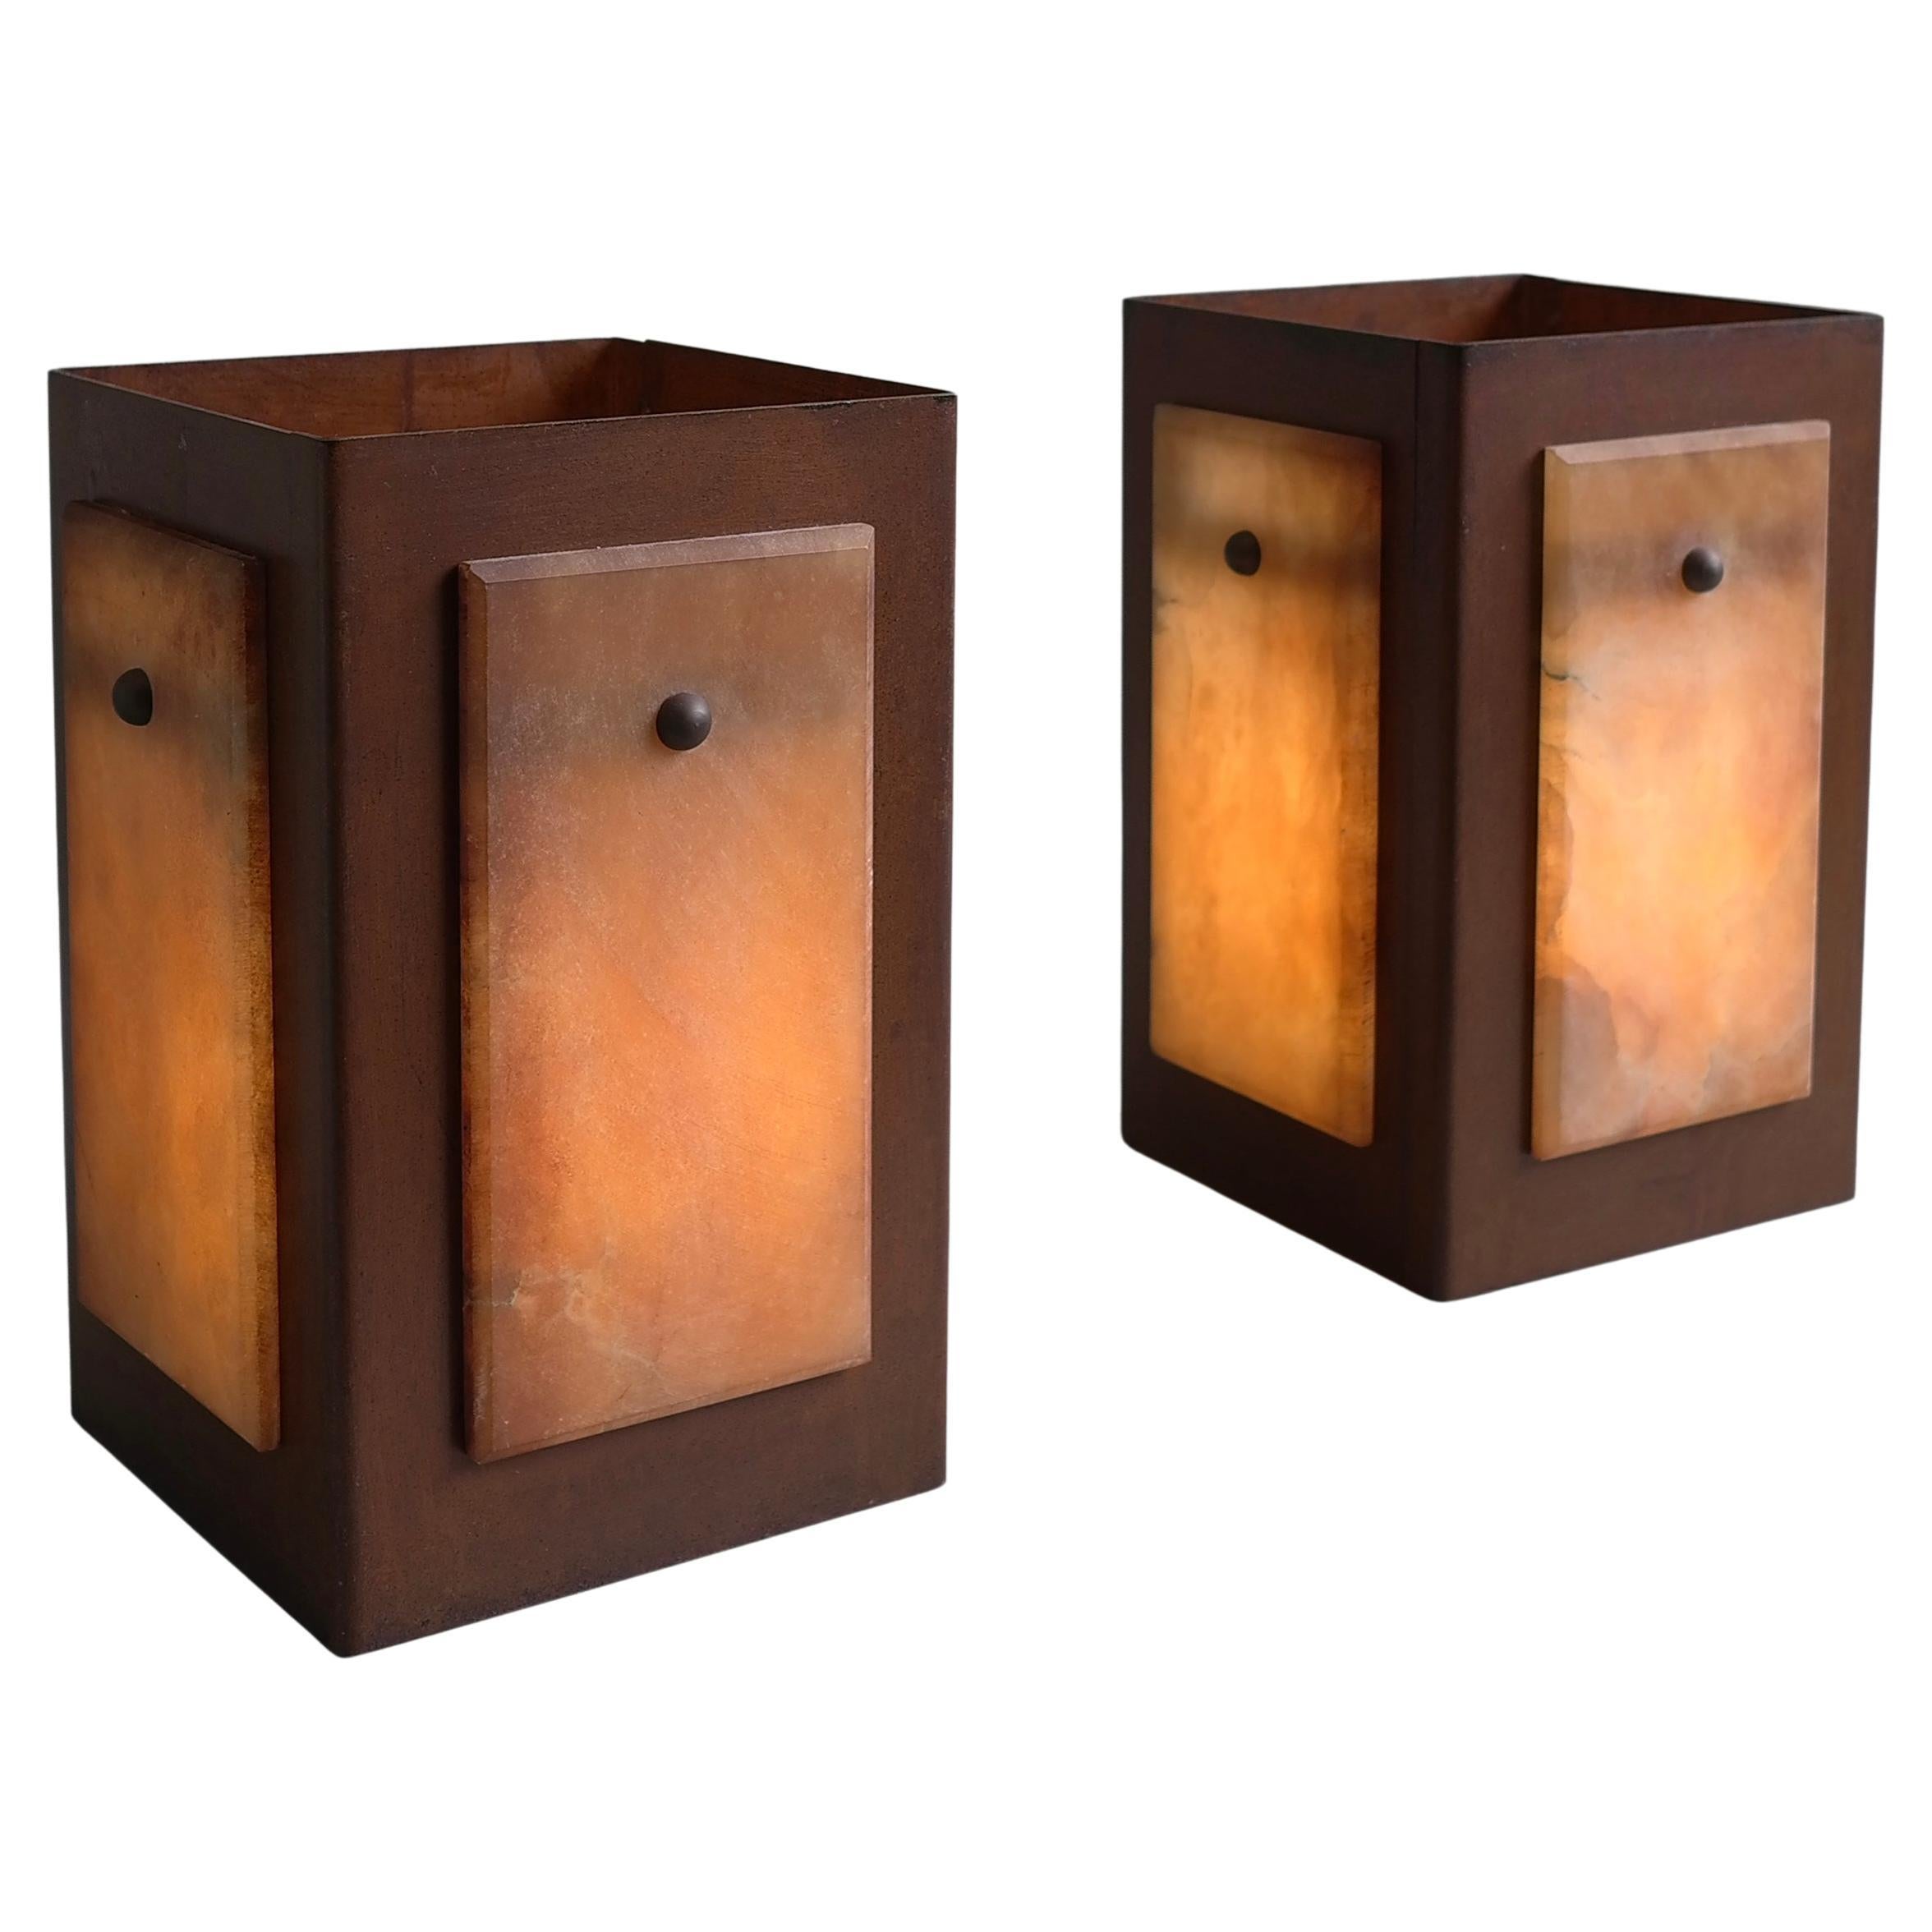 Table Lamps in Alabaster Stone and Rusty Metal, by Pegasam, Spain 1970s For Sale